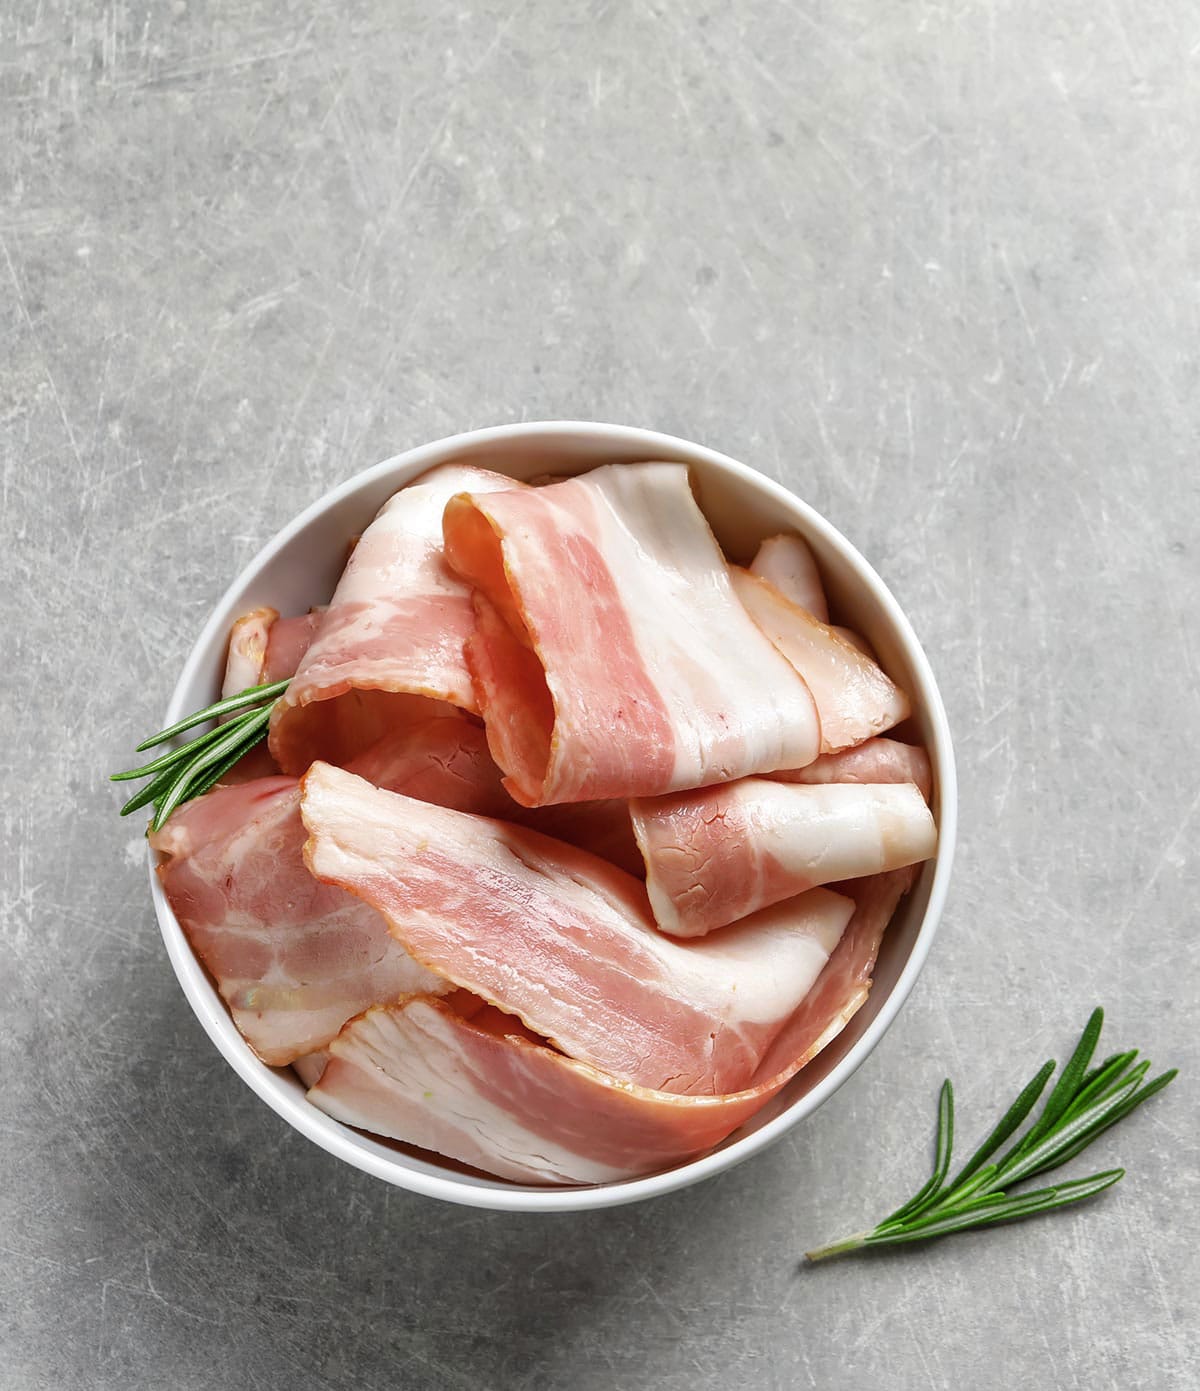 Slices of unsmoked bacon in a bowl. 